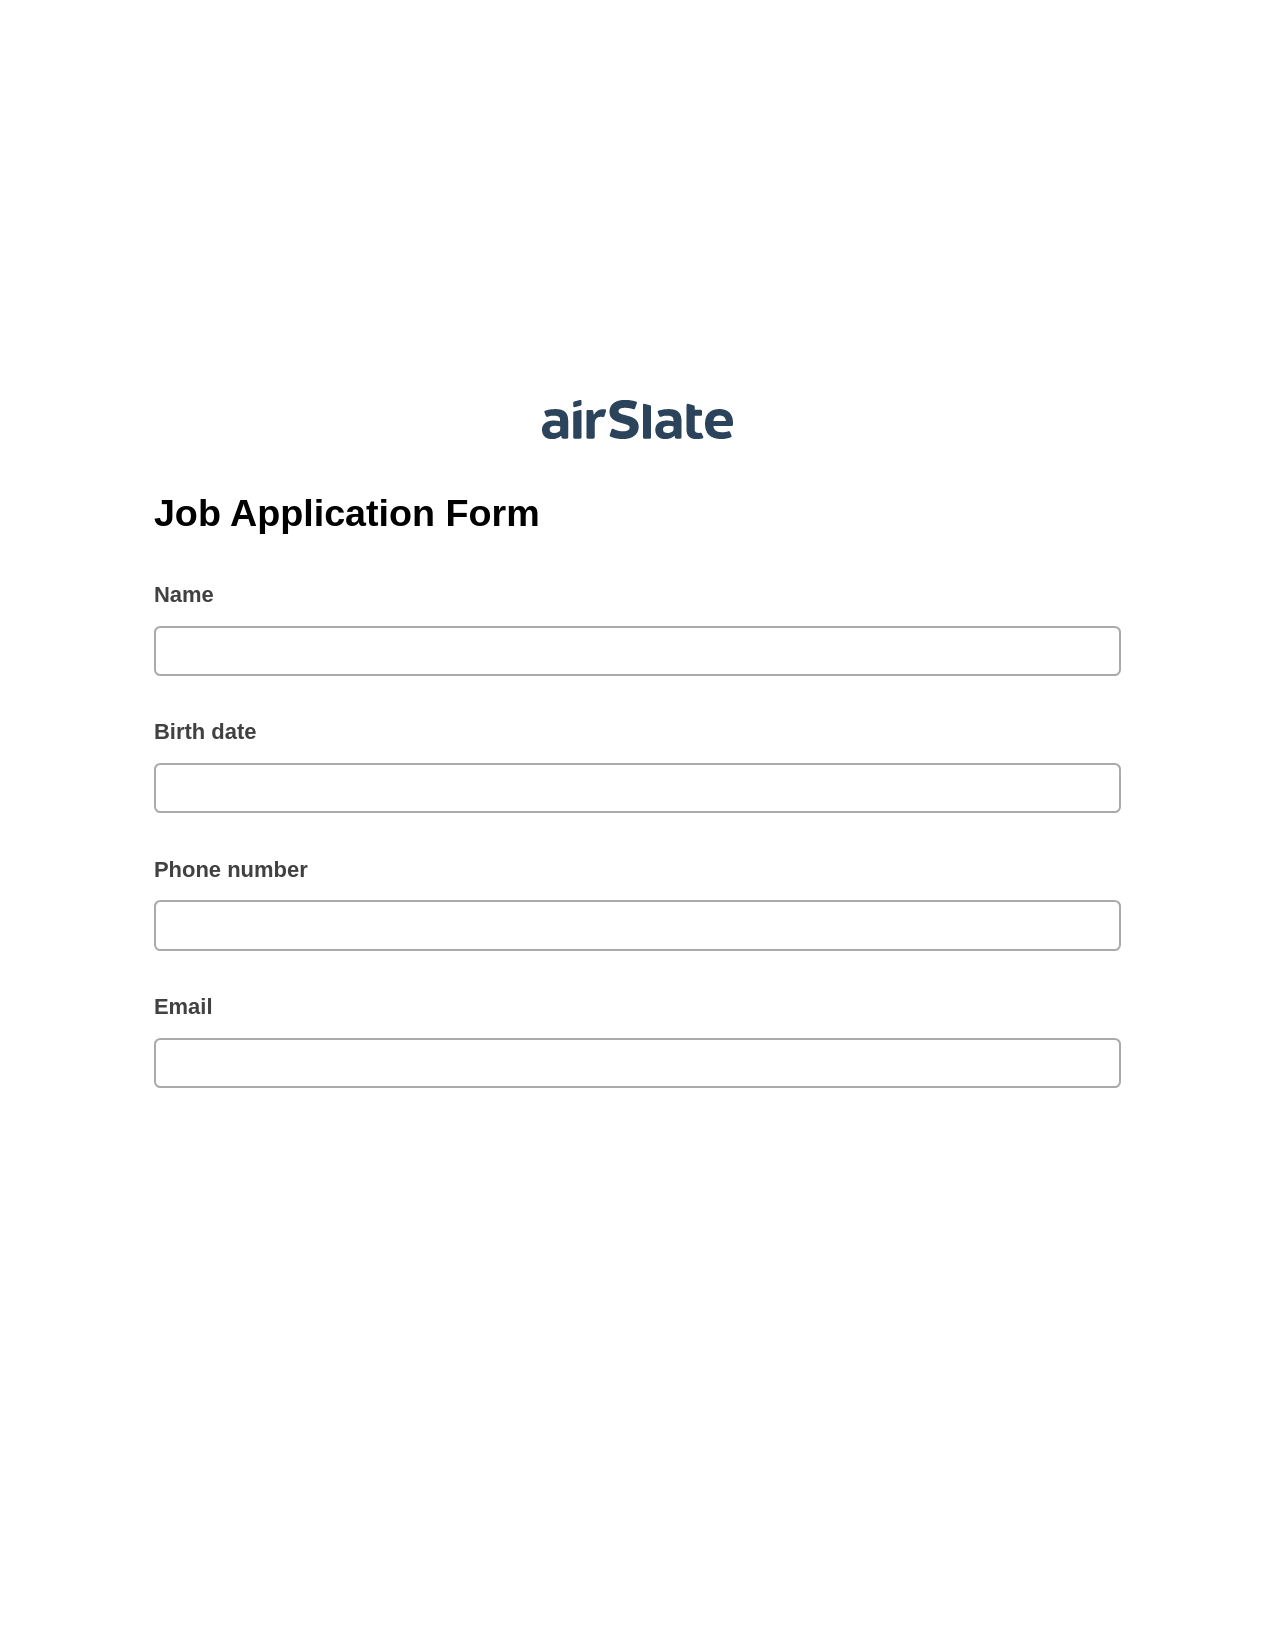 Job Application Form Pre-fill from Google Sheet Dropdown Options Bot, Pre-fill with Custom Data Bot, Text Message Notification Postfinish Bot